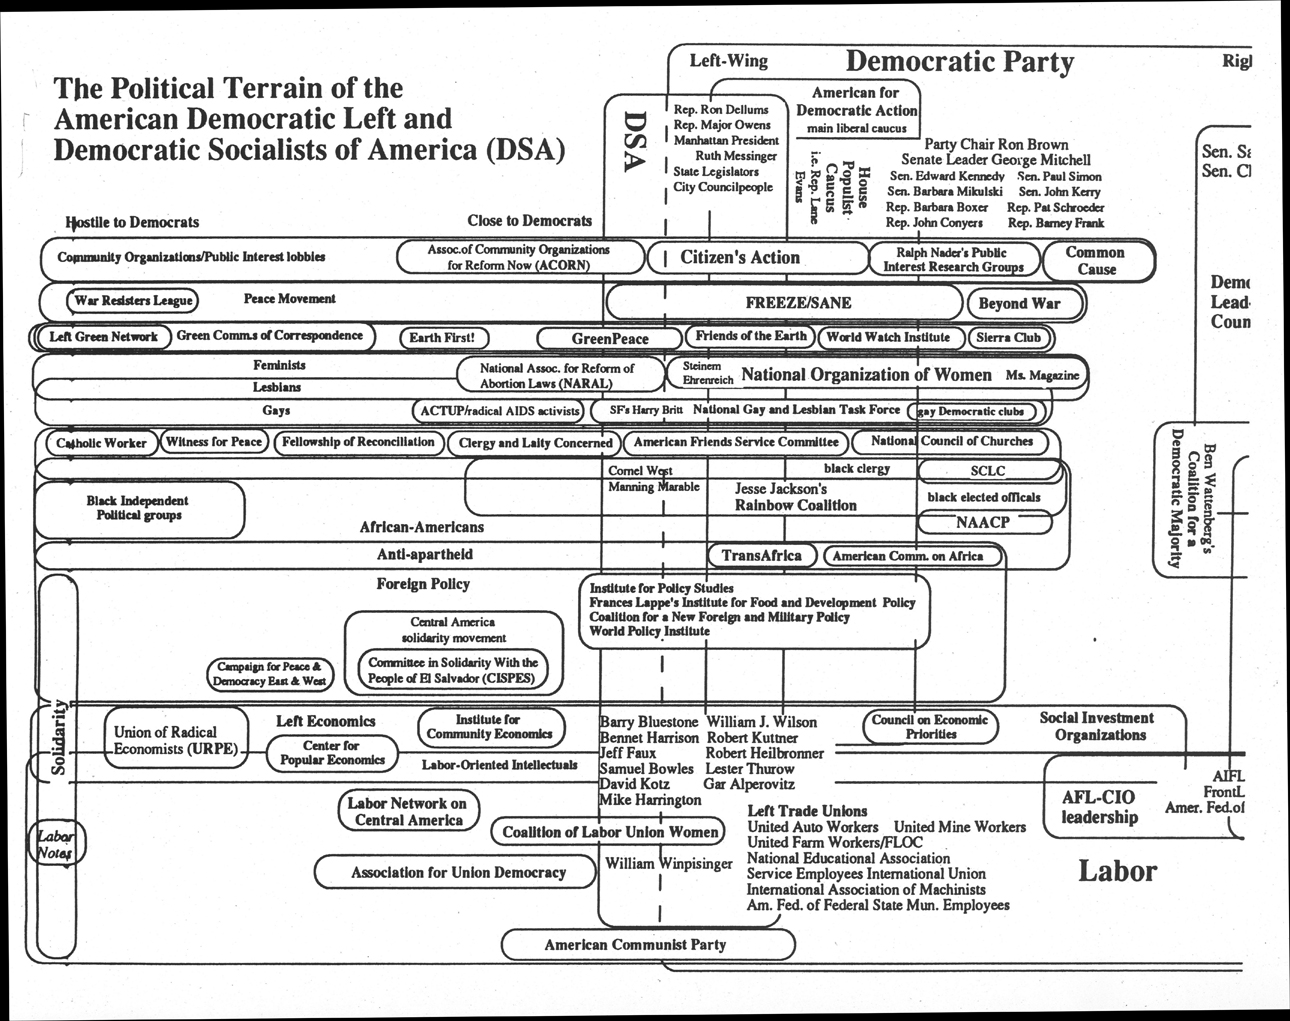 Document from the 1970's detailing the political terrain of political groups in the American Left. Sourced from Political Extremism and Radicalism in the 20th Century: Far Right and Left Political Groups in the US, Europe, and Australia a groundbreaking digital collection of primary source documents that allows researchers to explore the development, actions and ideologies behind 20th century extremism and radicalism.